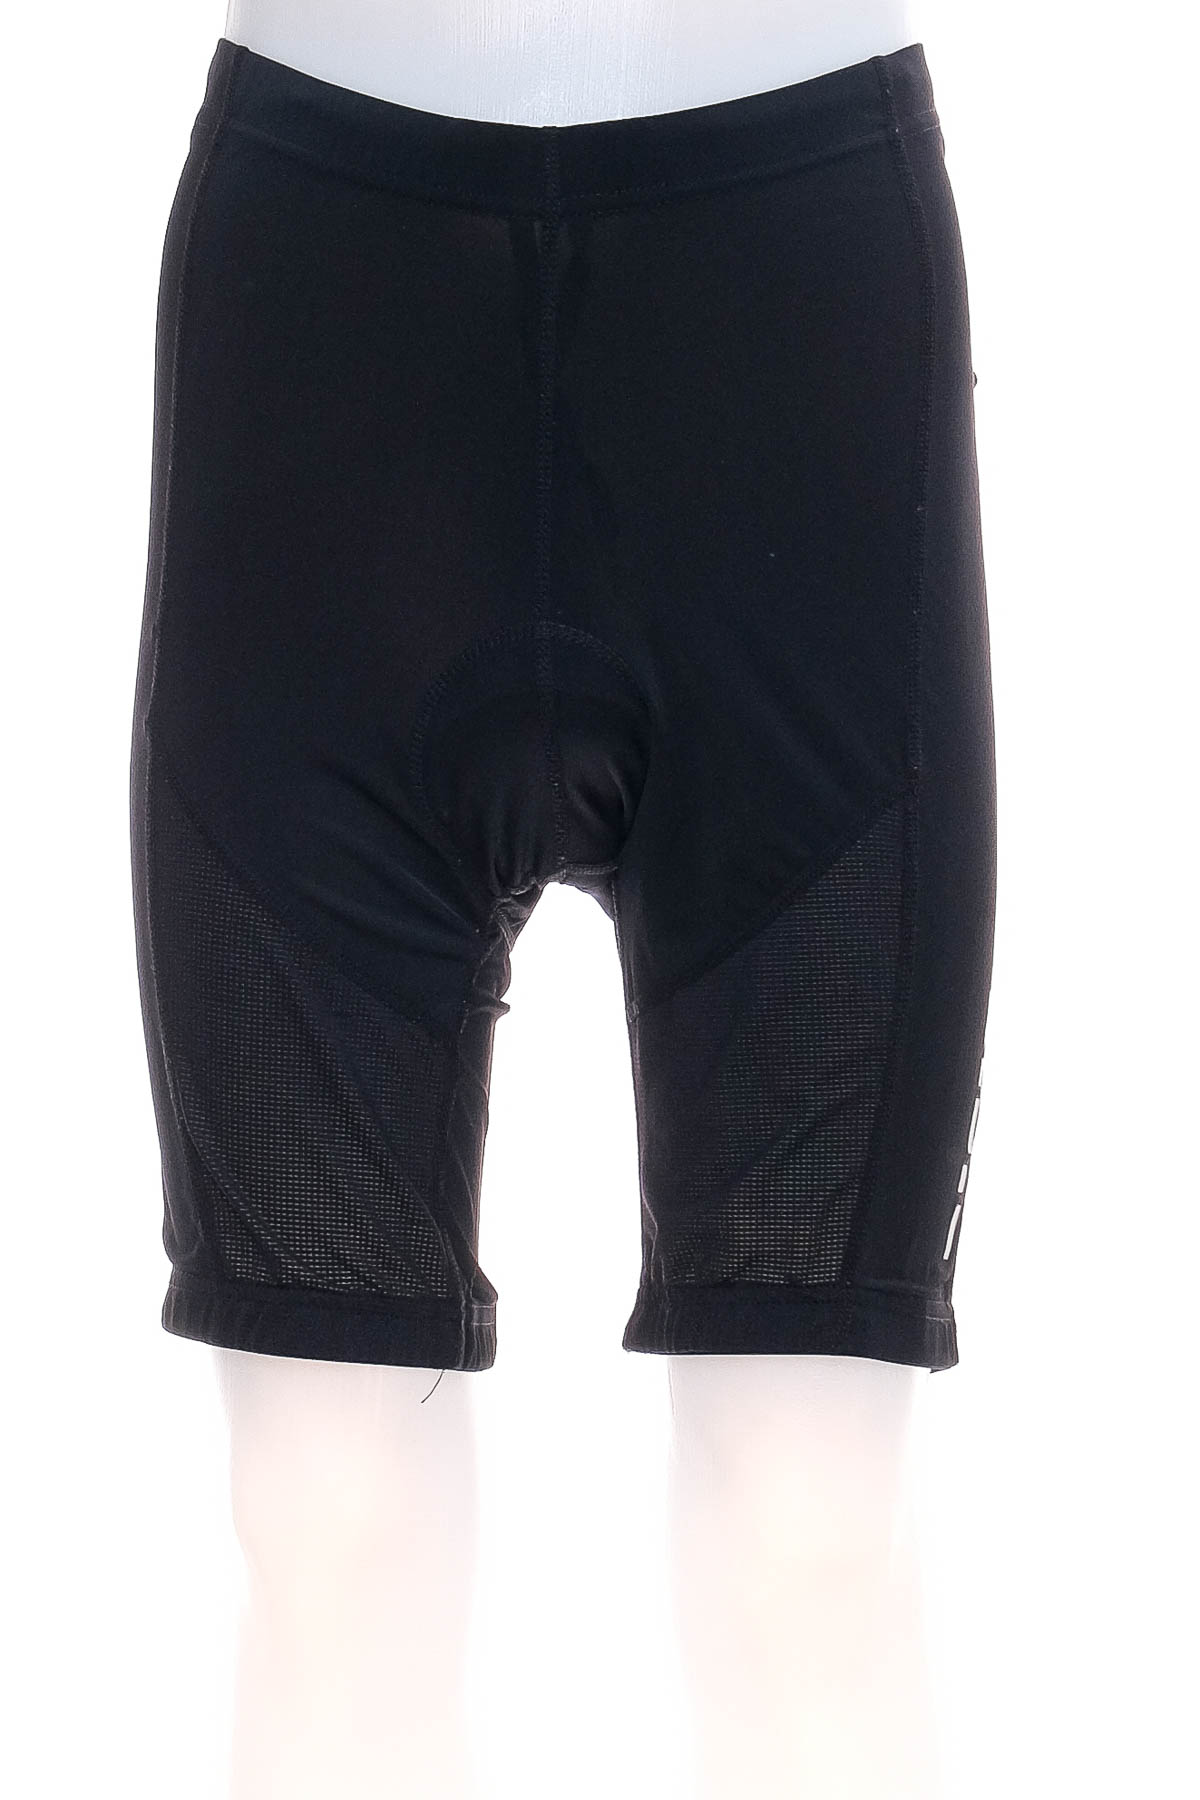 Man's cycling tights - Active Touch - 0